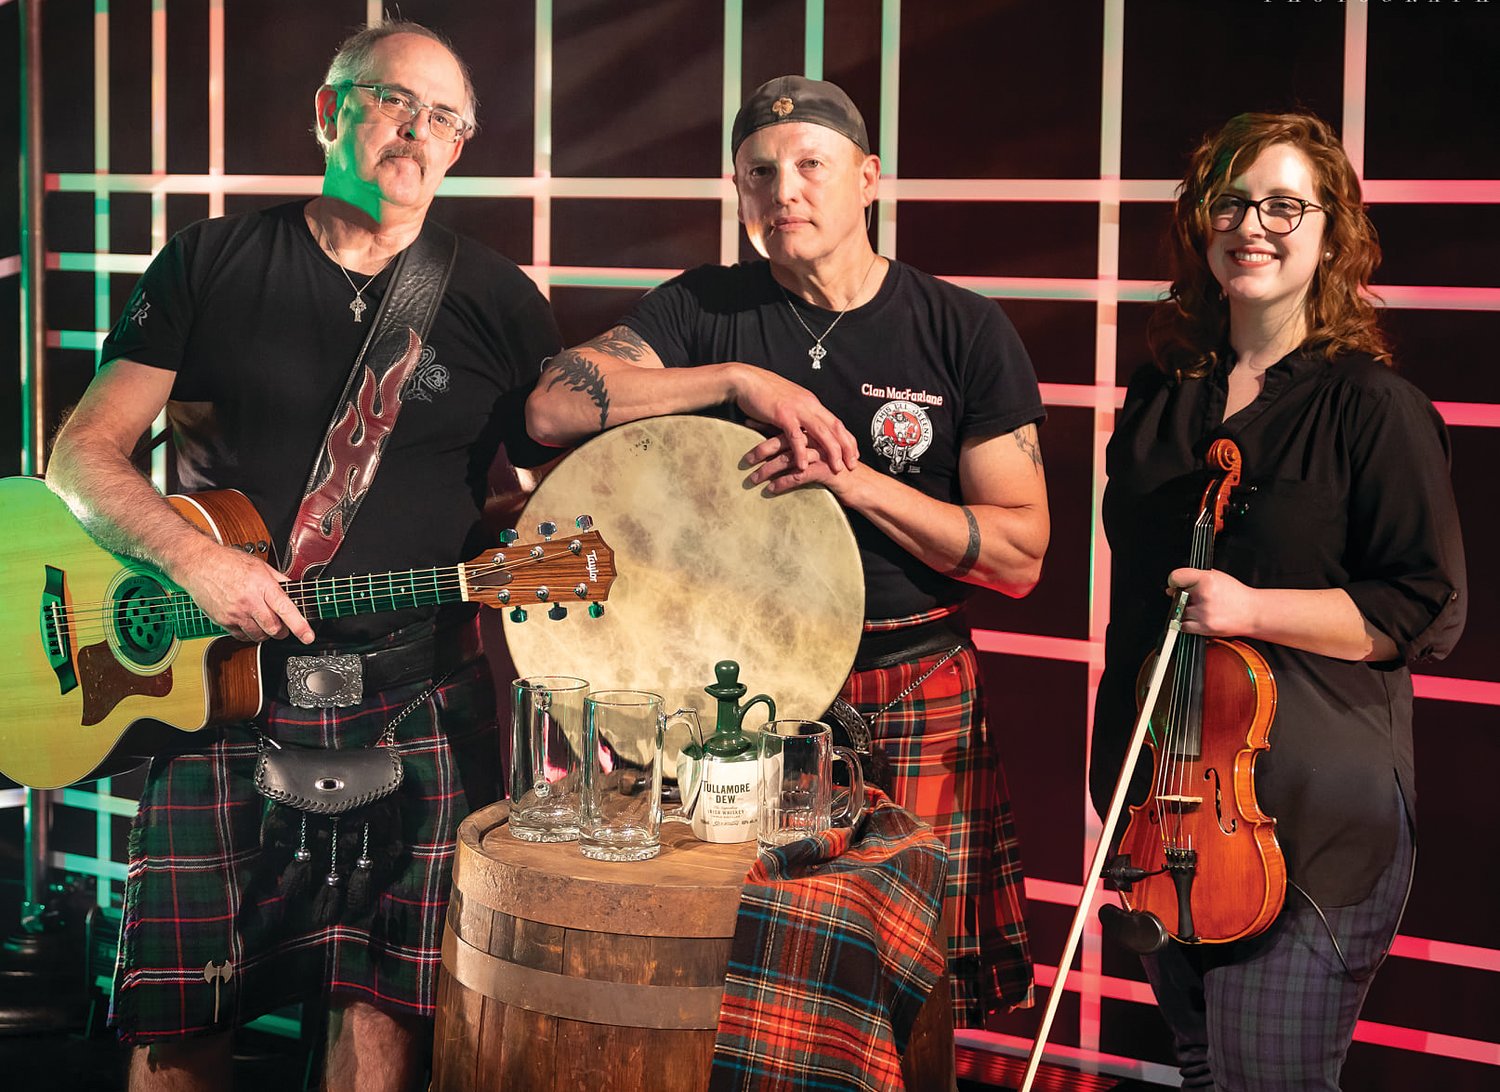 Highland Reign is this year’s opening band. It consists of Leslie Miller, Patrick Norris and Sarah Yingst. They will play 1-3 p.m.